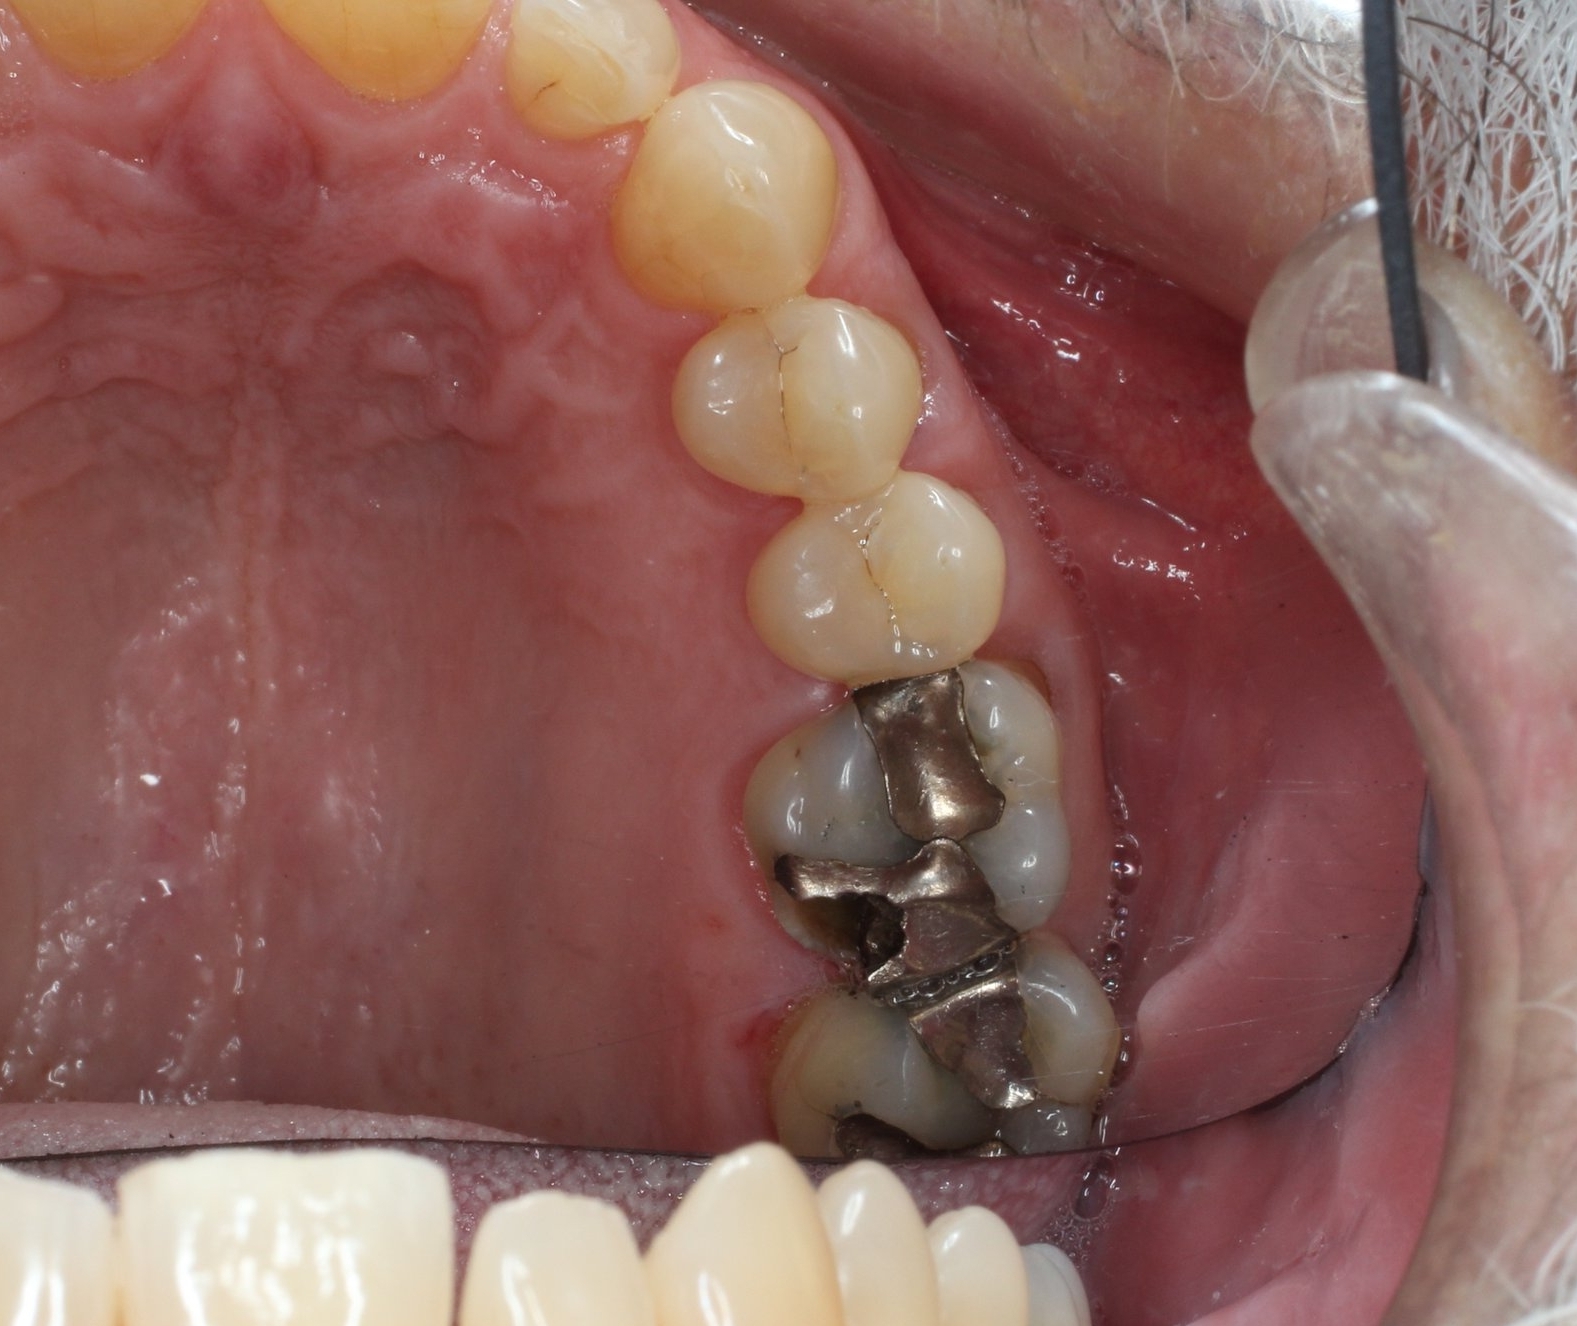 Large mercury filling causing the tooth to fracture